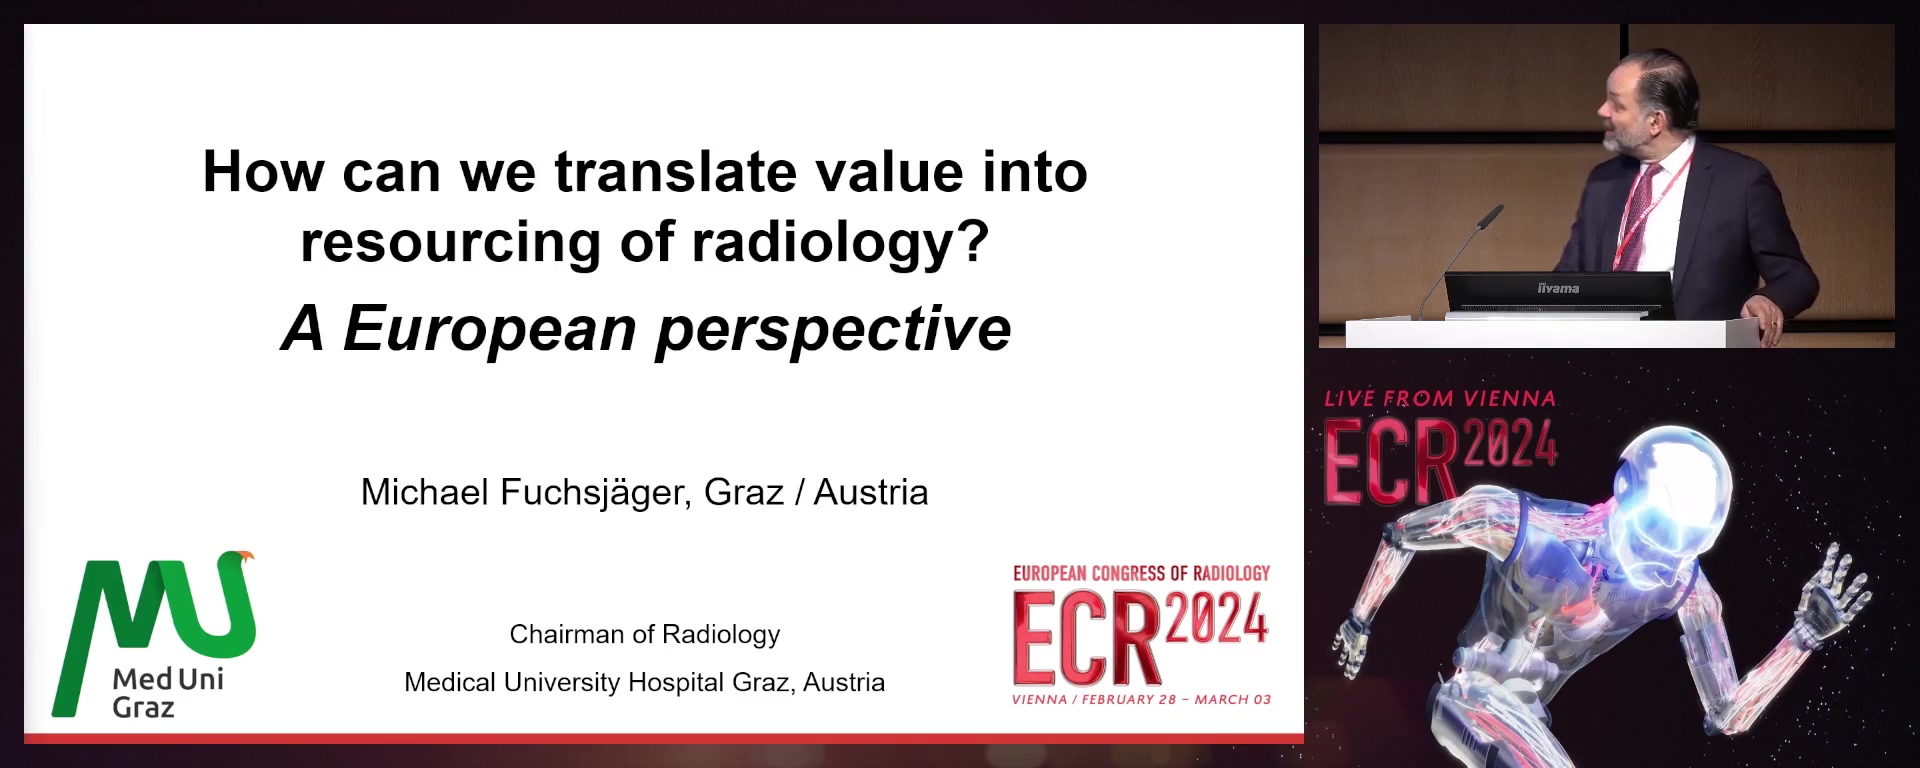 How can we translate value into resourcing of radiology: a European perspective?